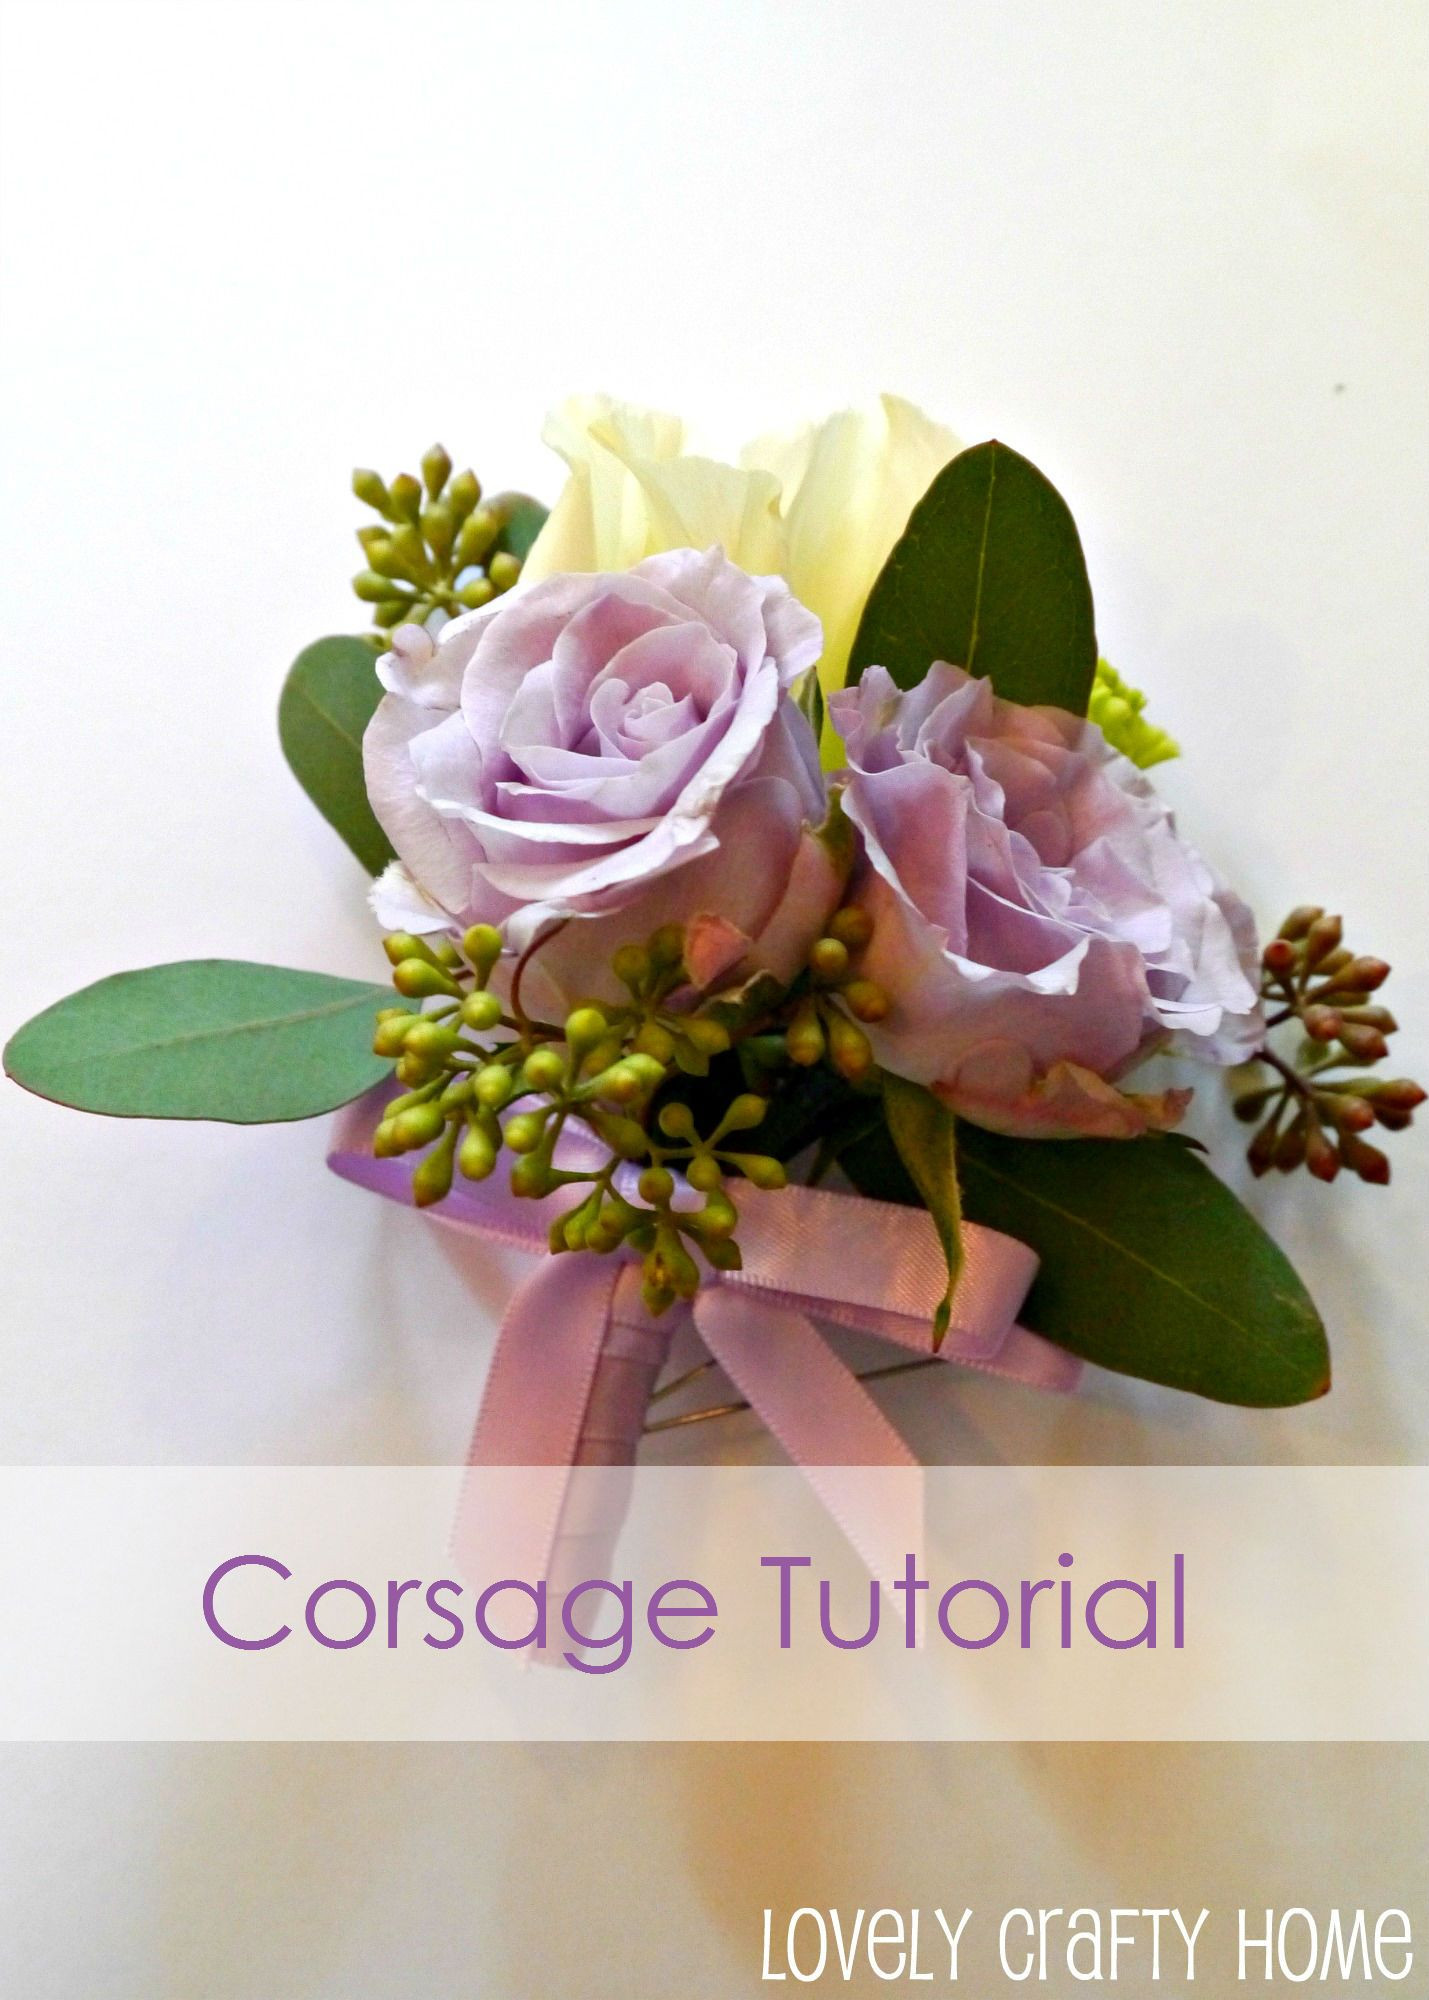 DIY Wedding Corsages
 DIY Bride on a Bud corsage for mother of the bride